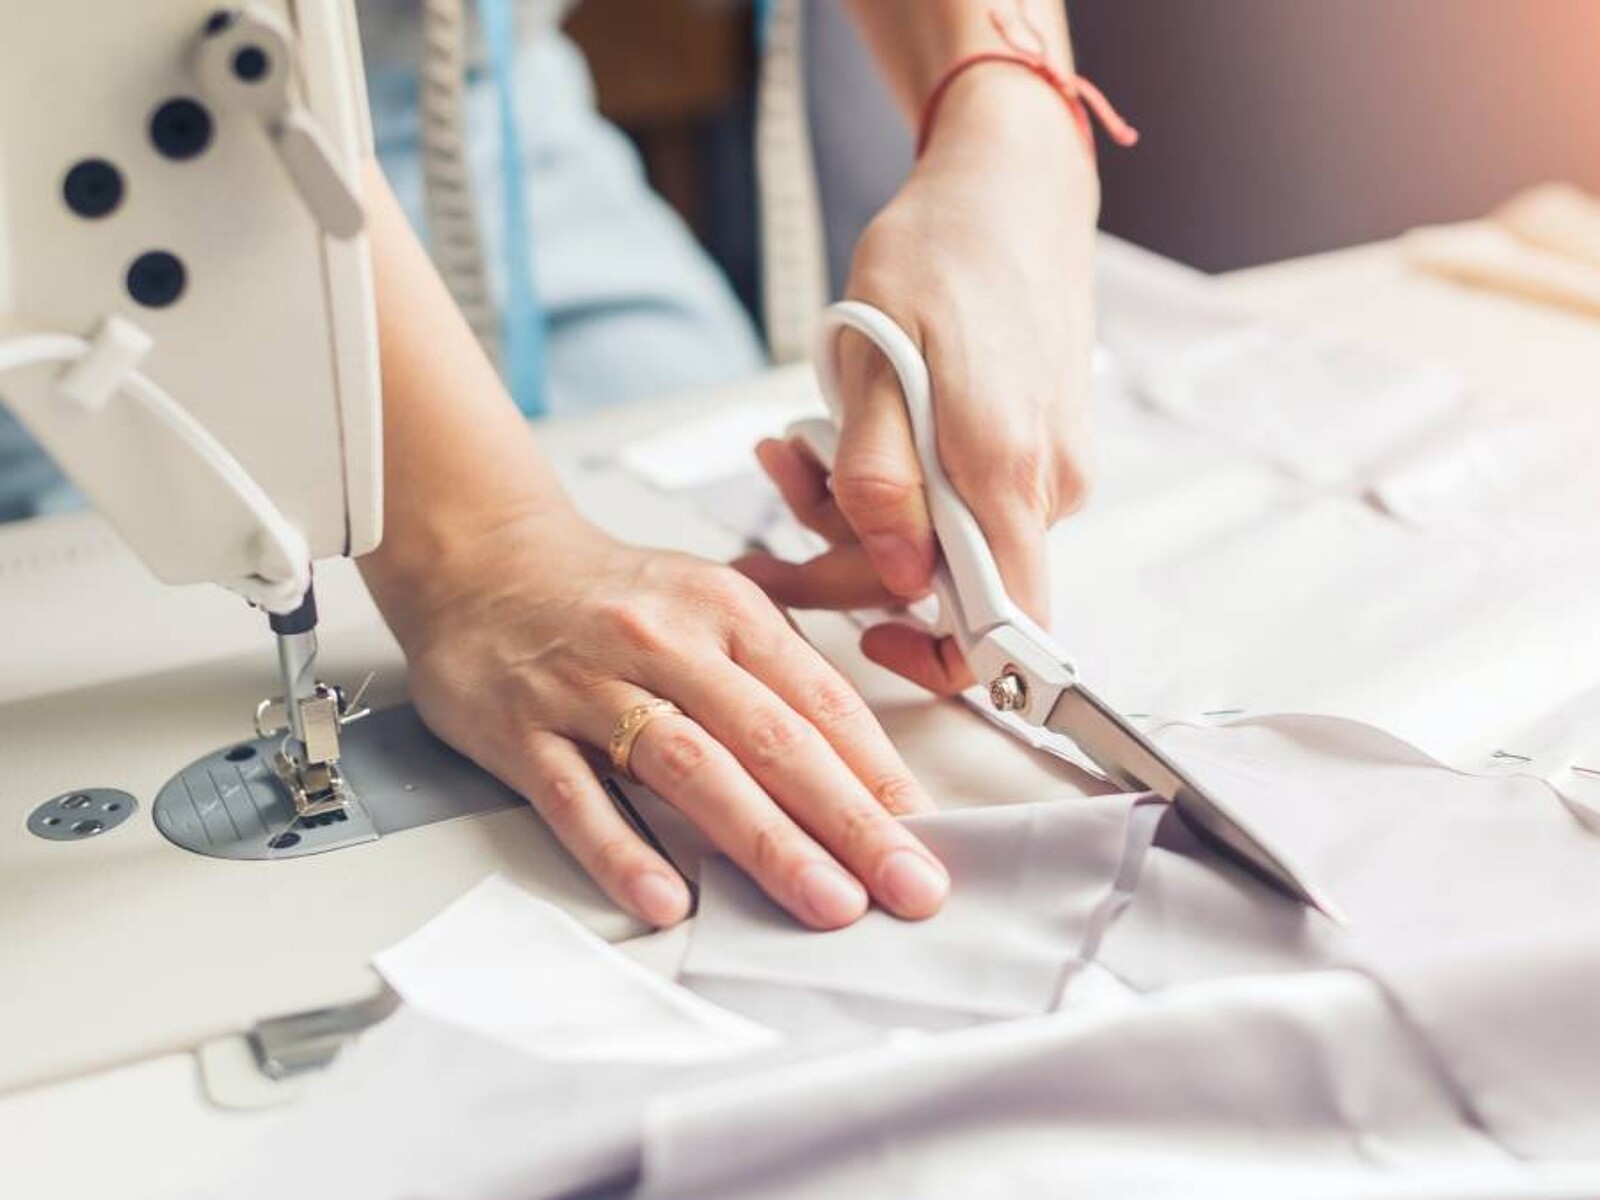 5-min. Alterations: tailor a bigger size dress in less than 5 mins.